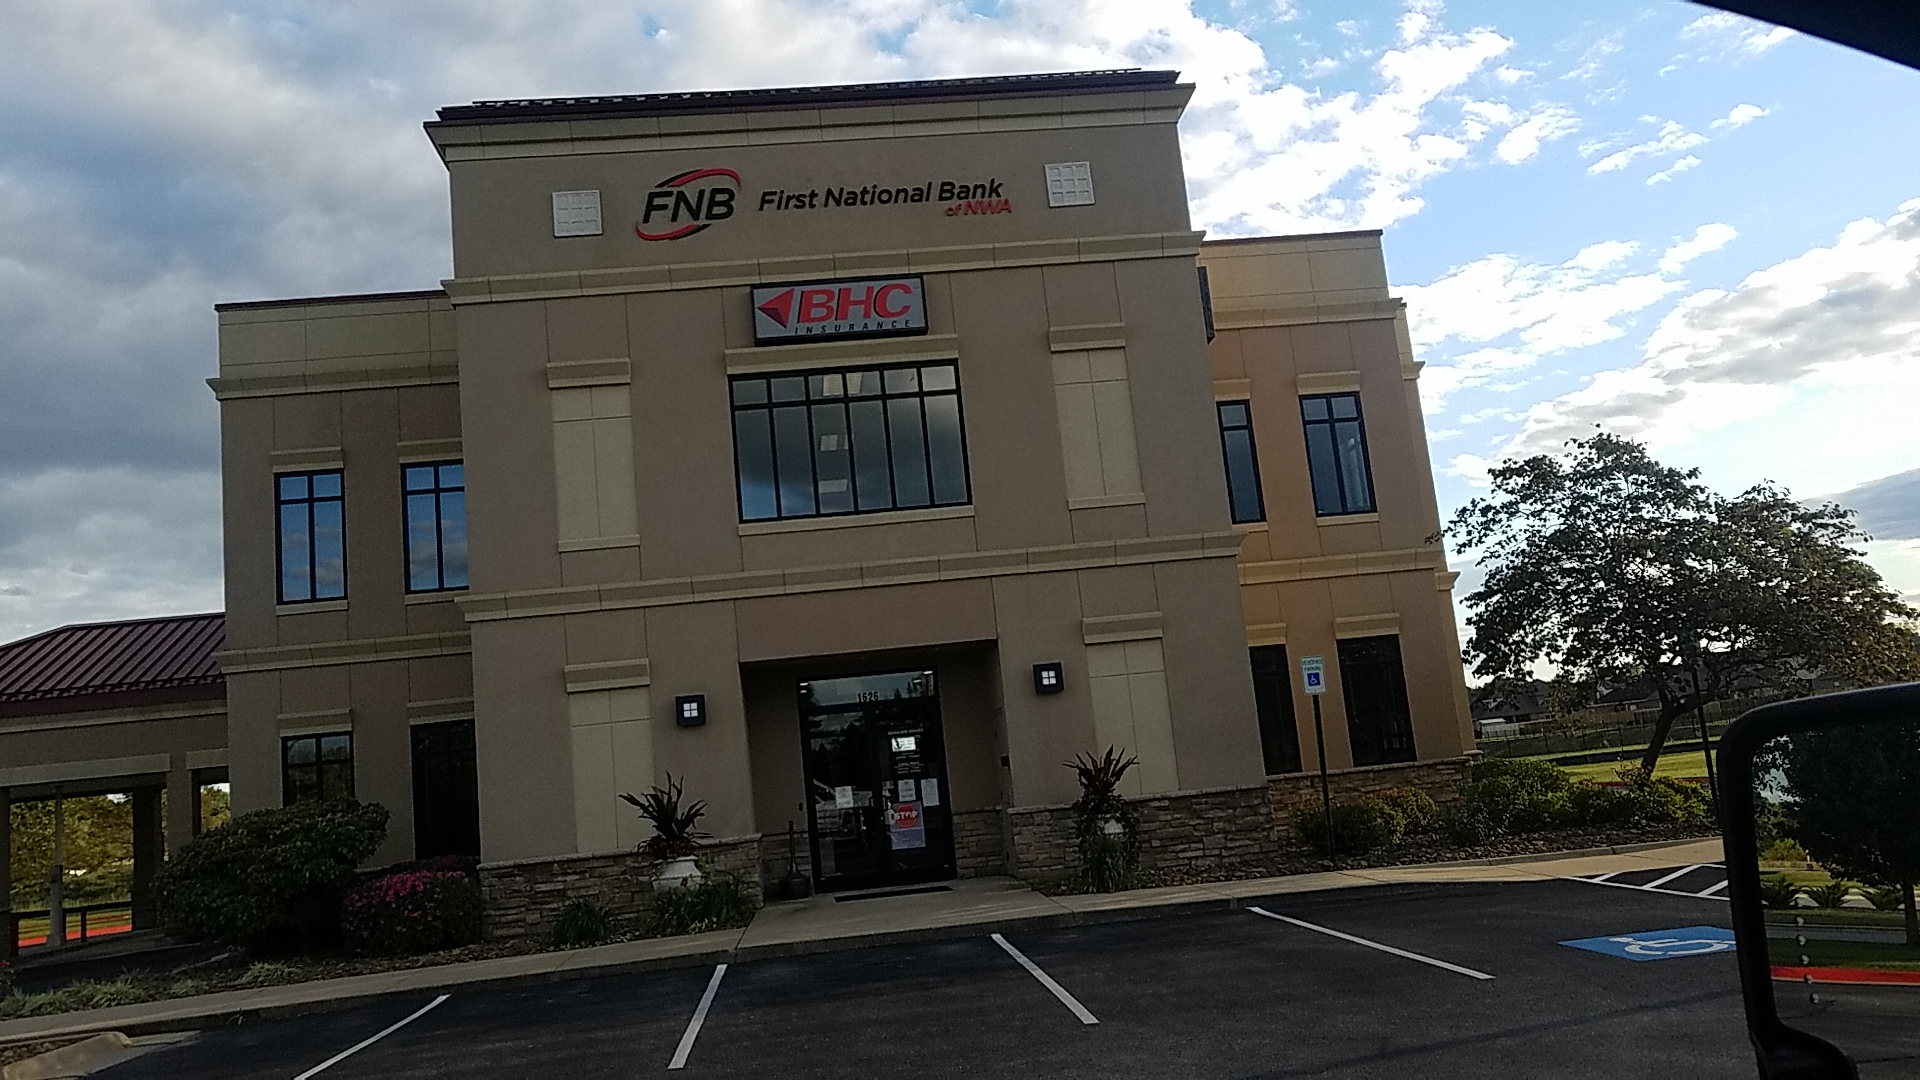 First National Bank of NWA